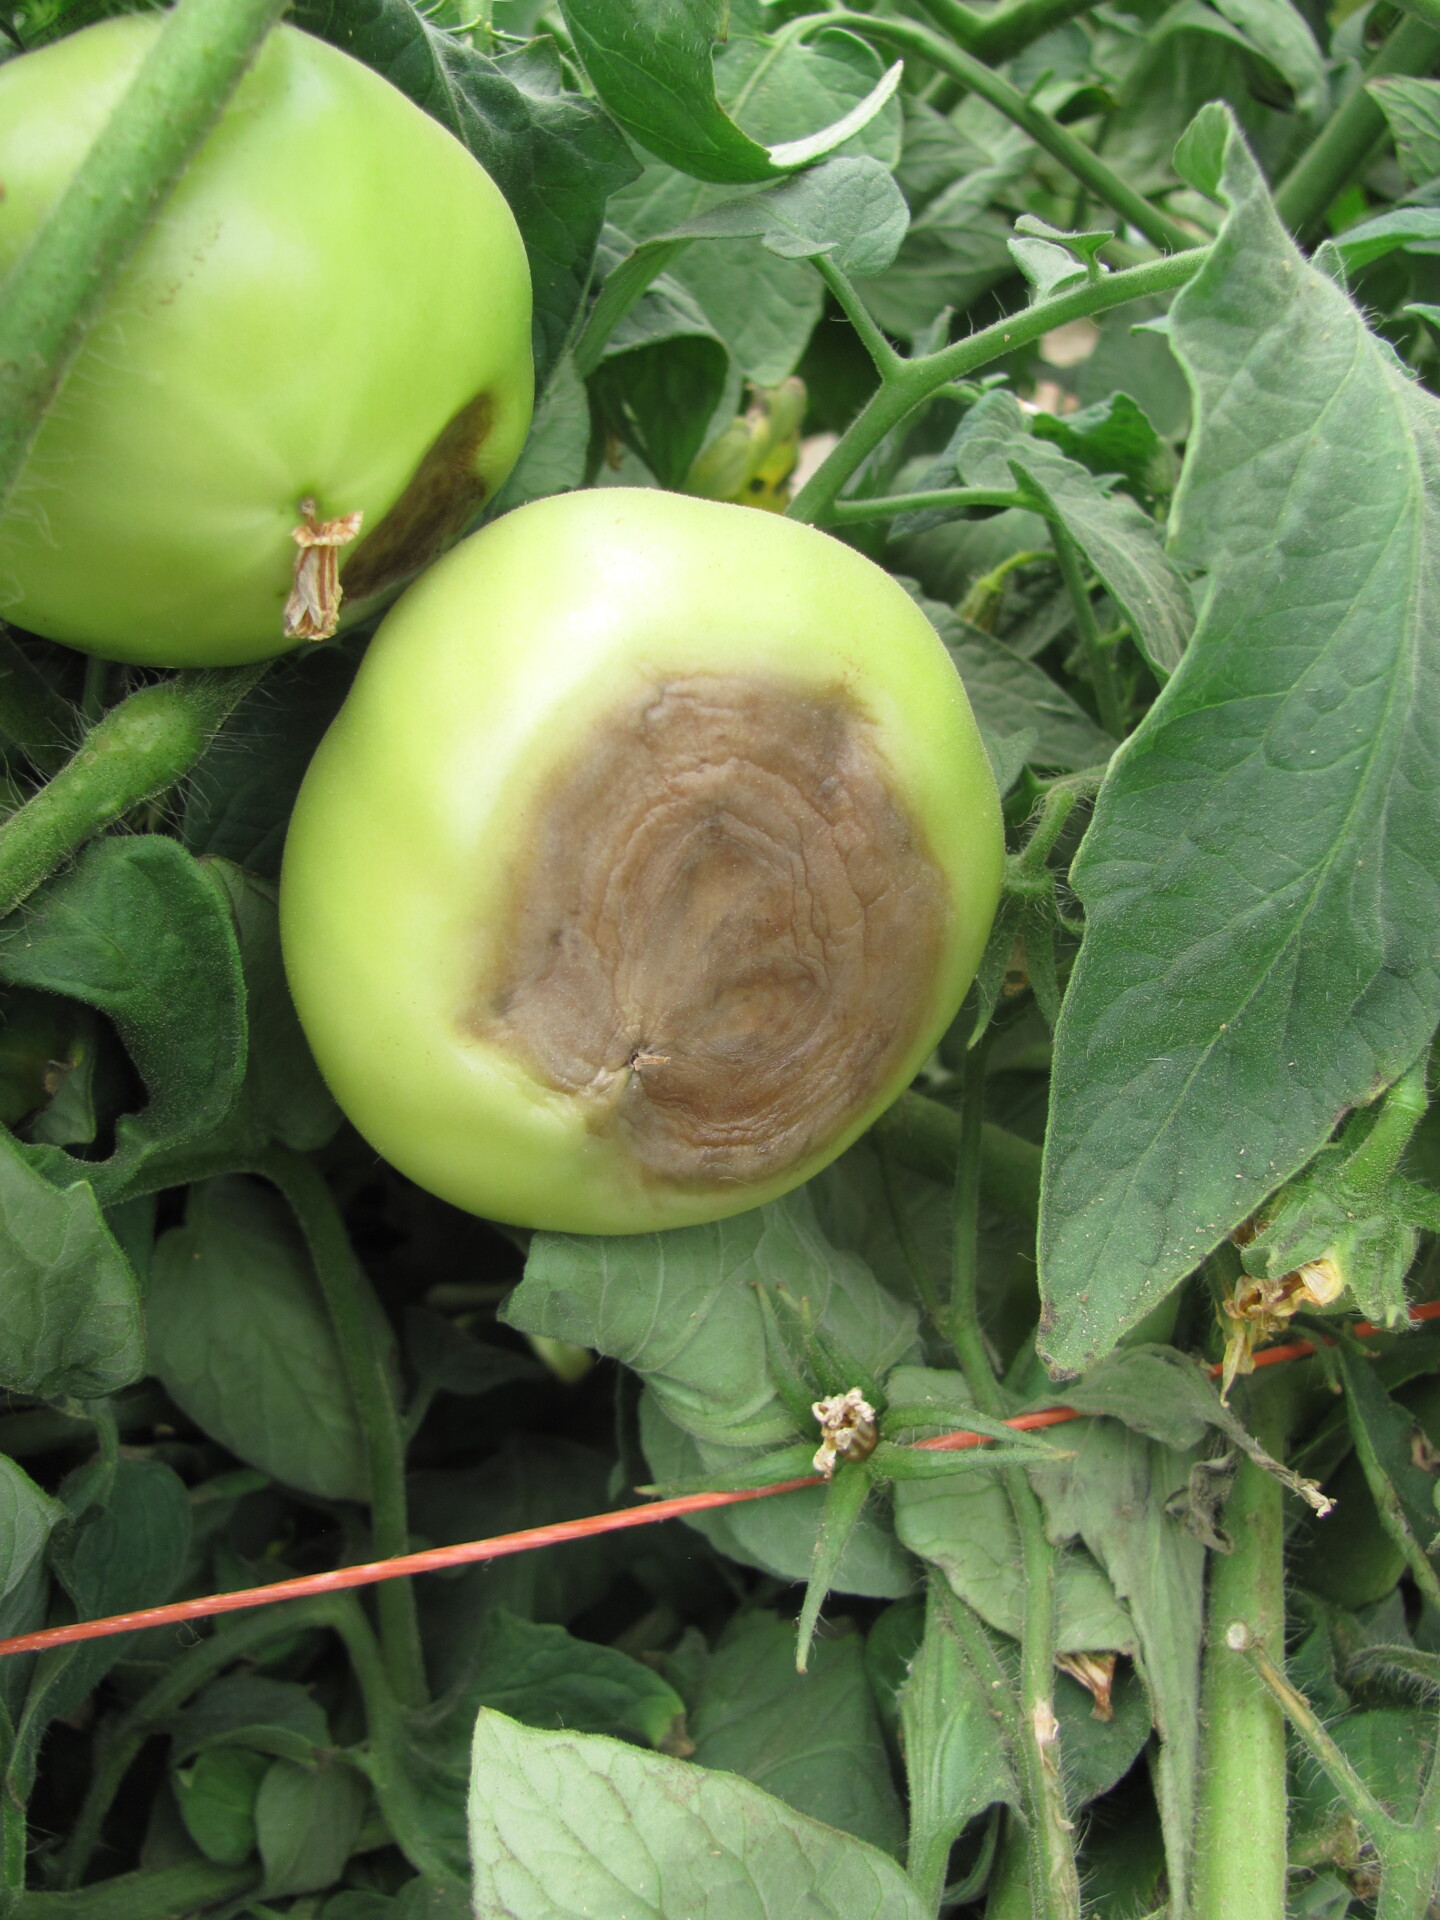 Figure 1. Blossom end rot of tomato can be recognized by a leathery brown lesion at the base of the tomato.